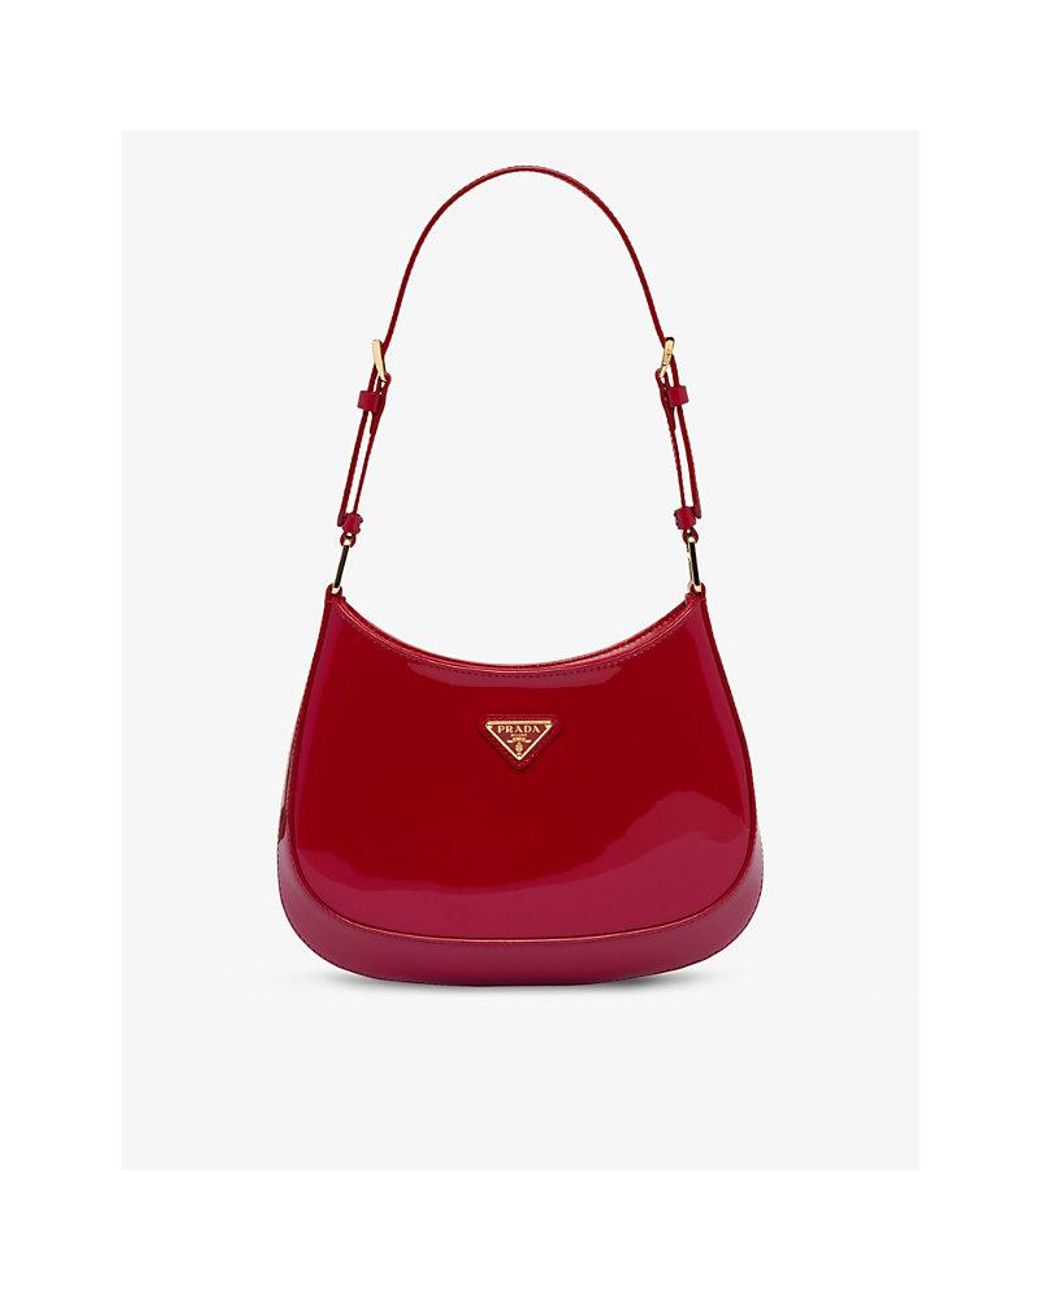 Prada Cleo Patent-leather Shoulder Bag in Red | Lyst